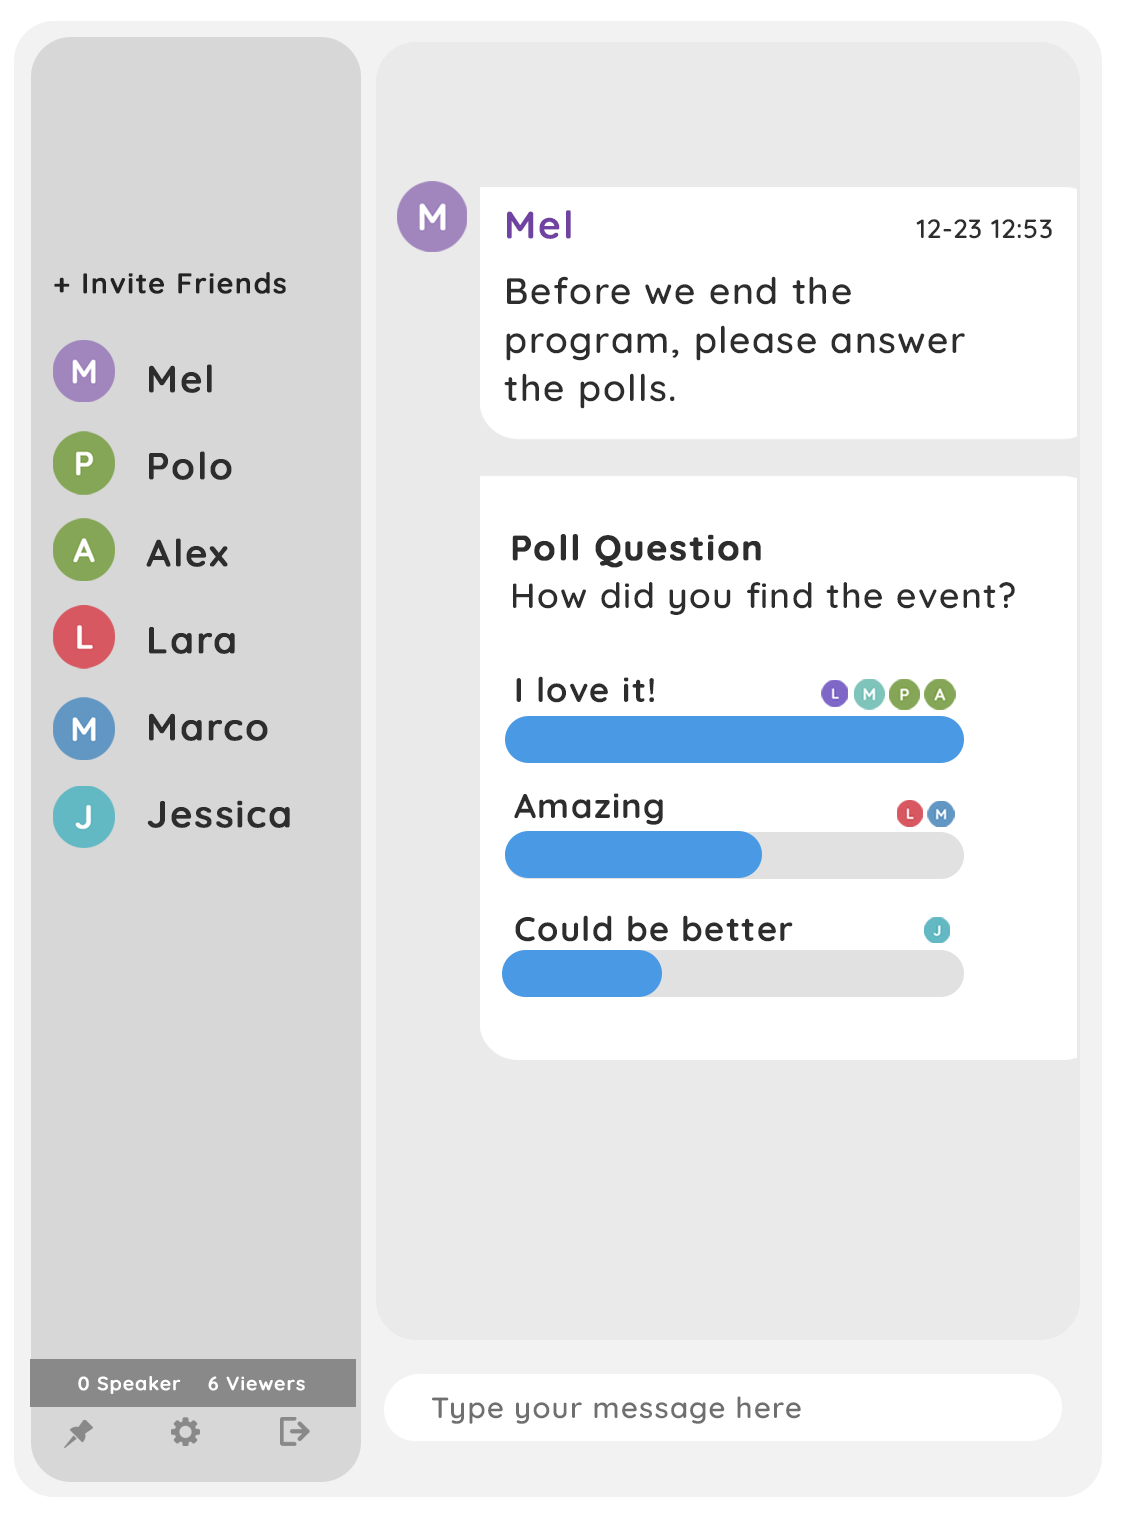 Polls provide a streamlined audience interaction in real-time. It allows you to host interactive online events, classes, or conferences with live audience feedback.